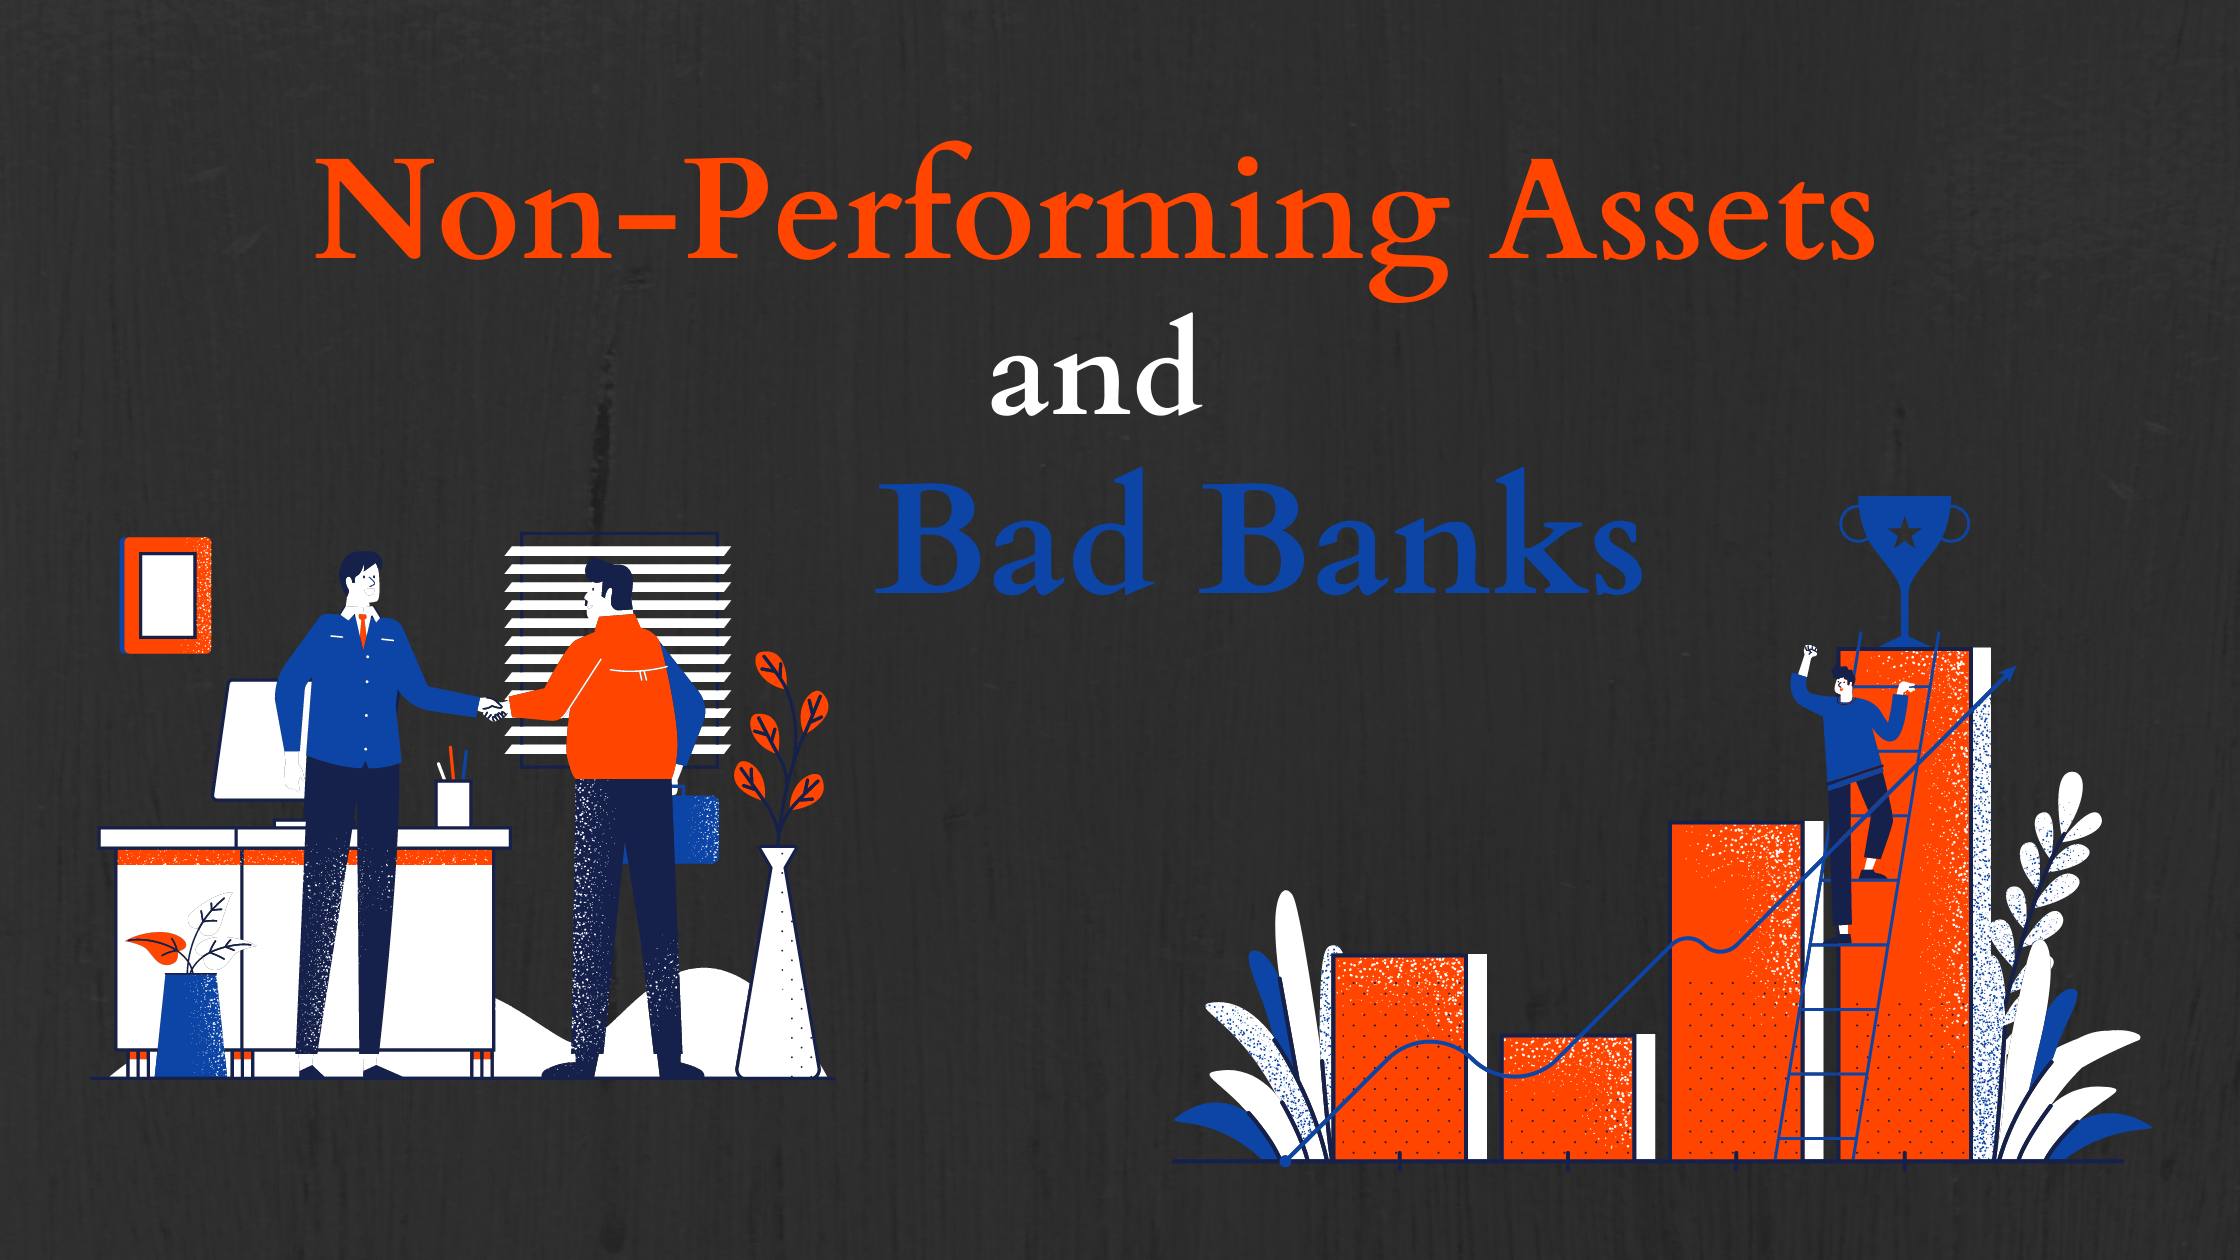 What is NPA (Non-Performing Assets) and Bad Banks